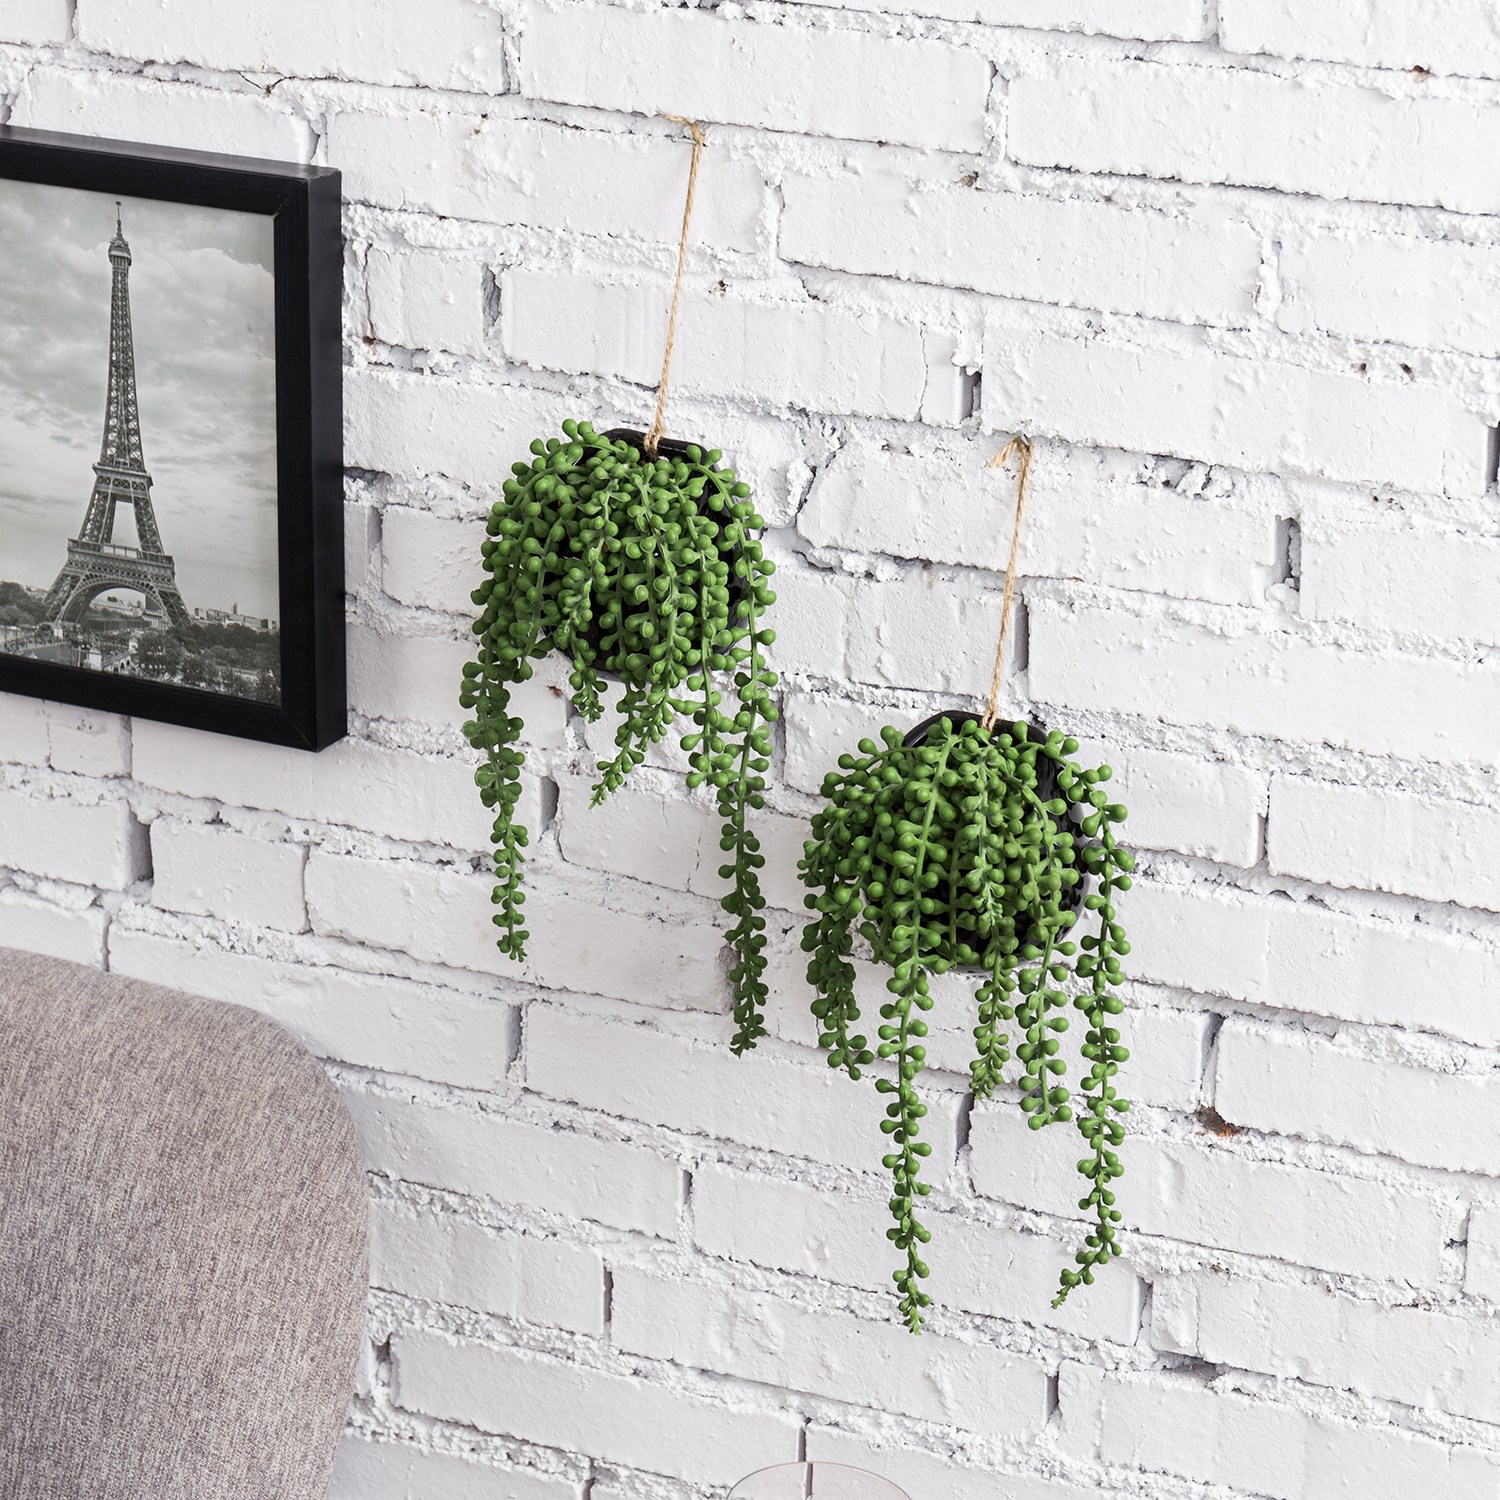 MyGift 10-inch Wall-Mounted Artificial String of Pearls Plants in Black Ceramic Planters, Set of 2 - image 3 of 3